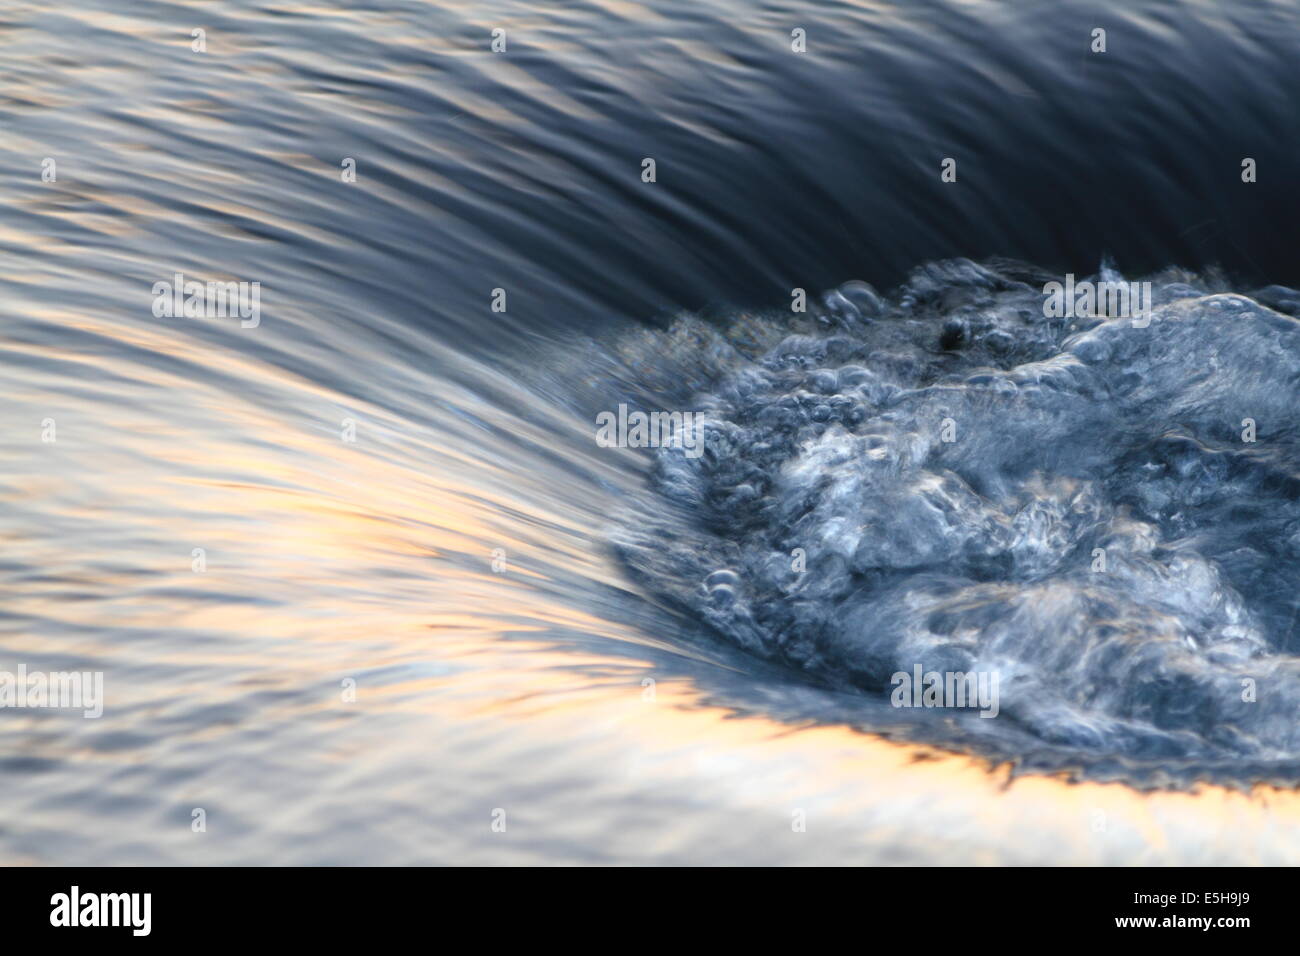 Water swirls and bubbles as it descends into a whirlpool-like funnel. Stock Photo